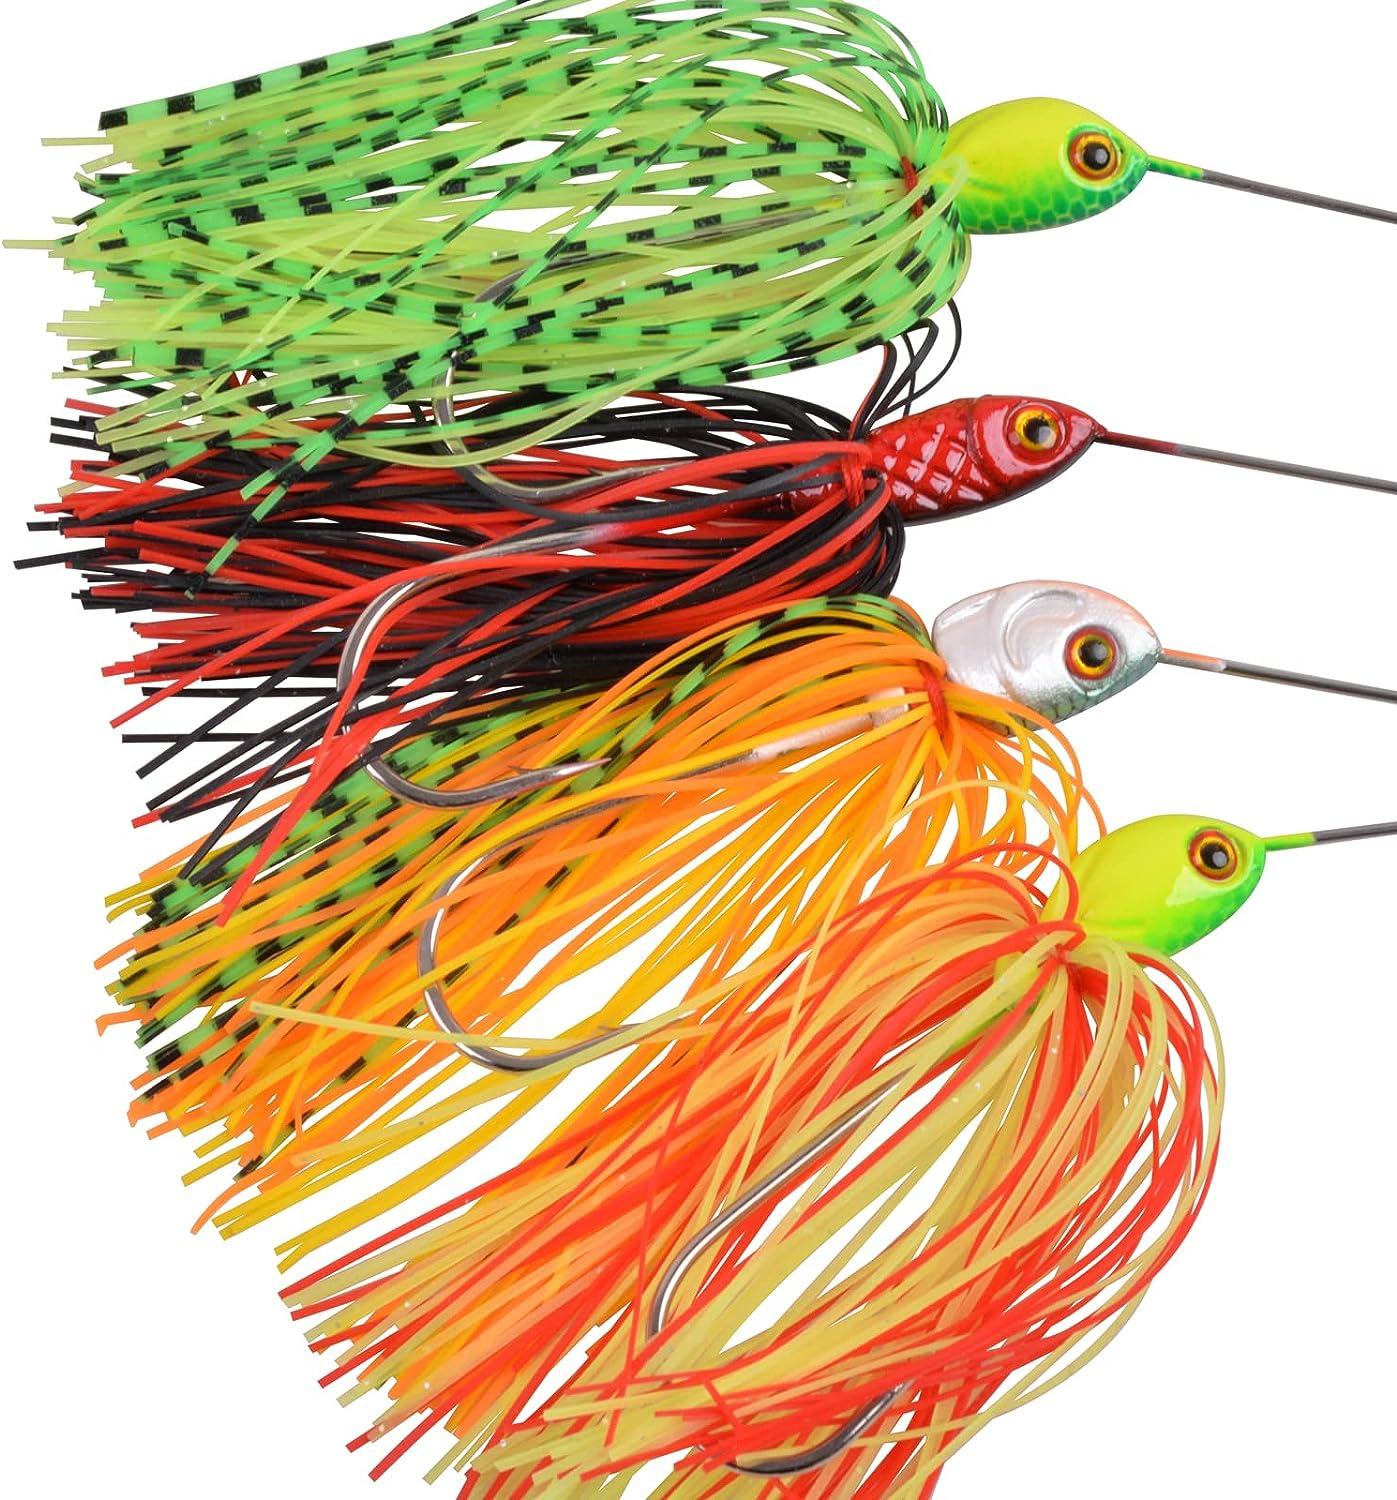 Fishing Lures Spinnerbait, Bass Fishing Lure Spinner Baits Kit Hard Metal  Multicolor Buzzbait Spinnerbait Jigs for Bass Pike Trout Salmon 6pcs  Spinnerbait